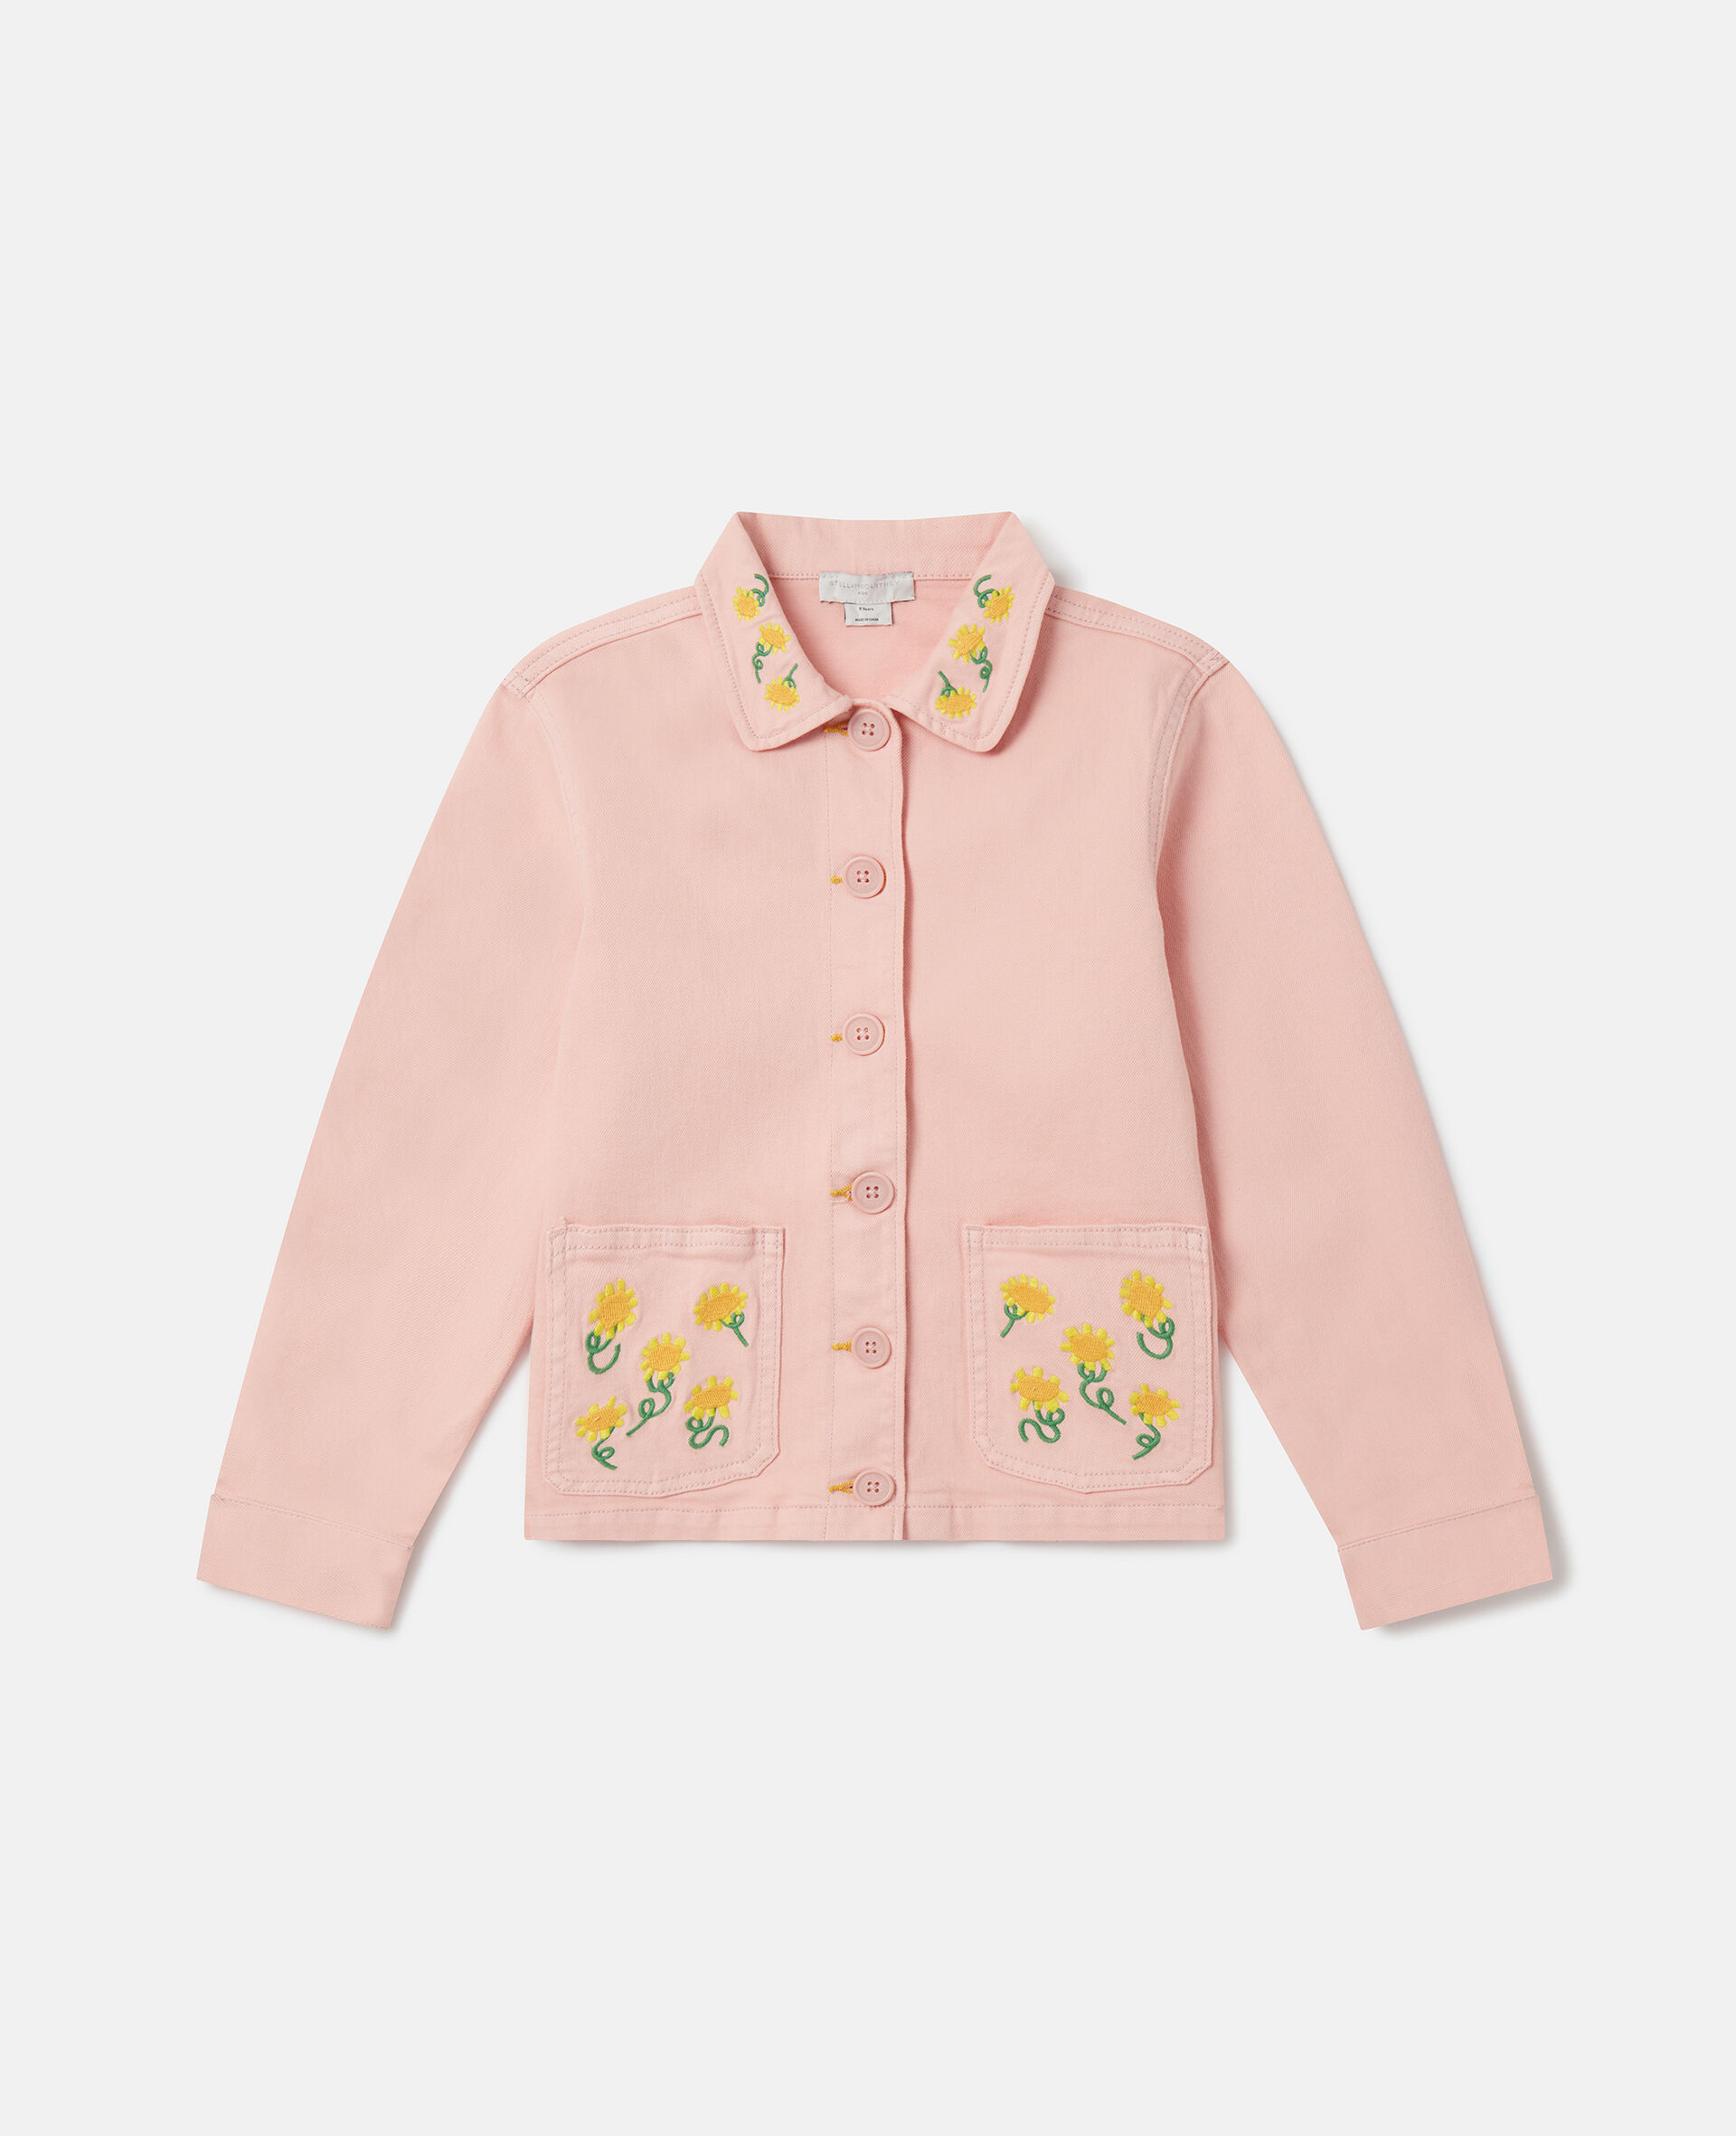 Sunflower Embroidery Cotton Jacket-Pink-large image number 0